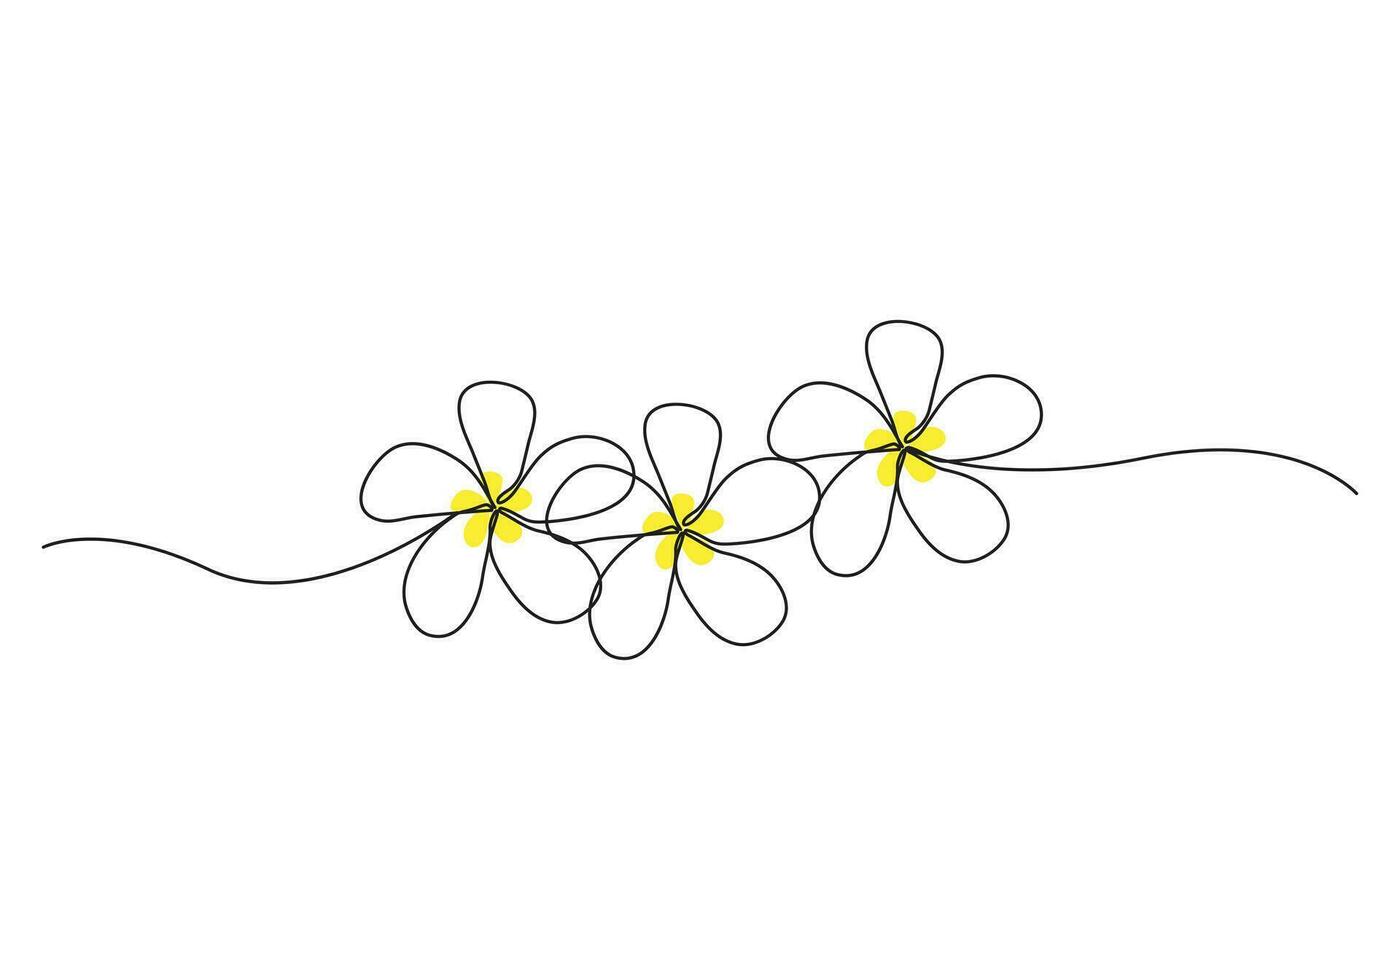 Plumeria flowers in continuous one  line art drawing. Frangipani blossom. Vector illustration isolated on white.